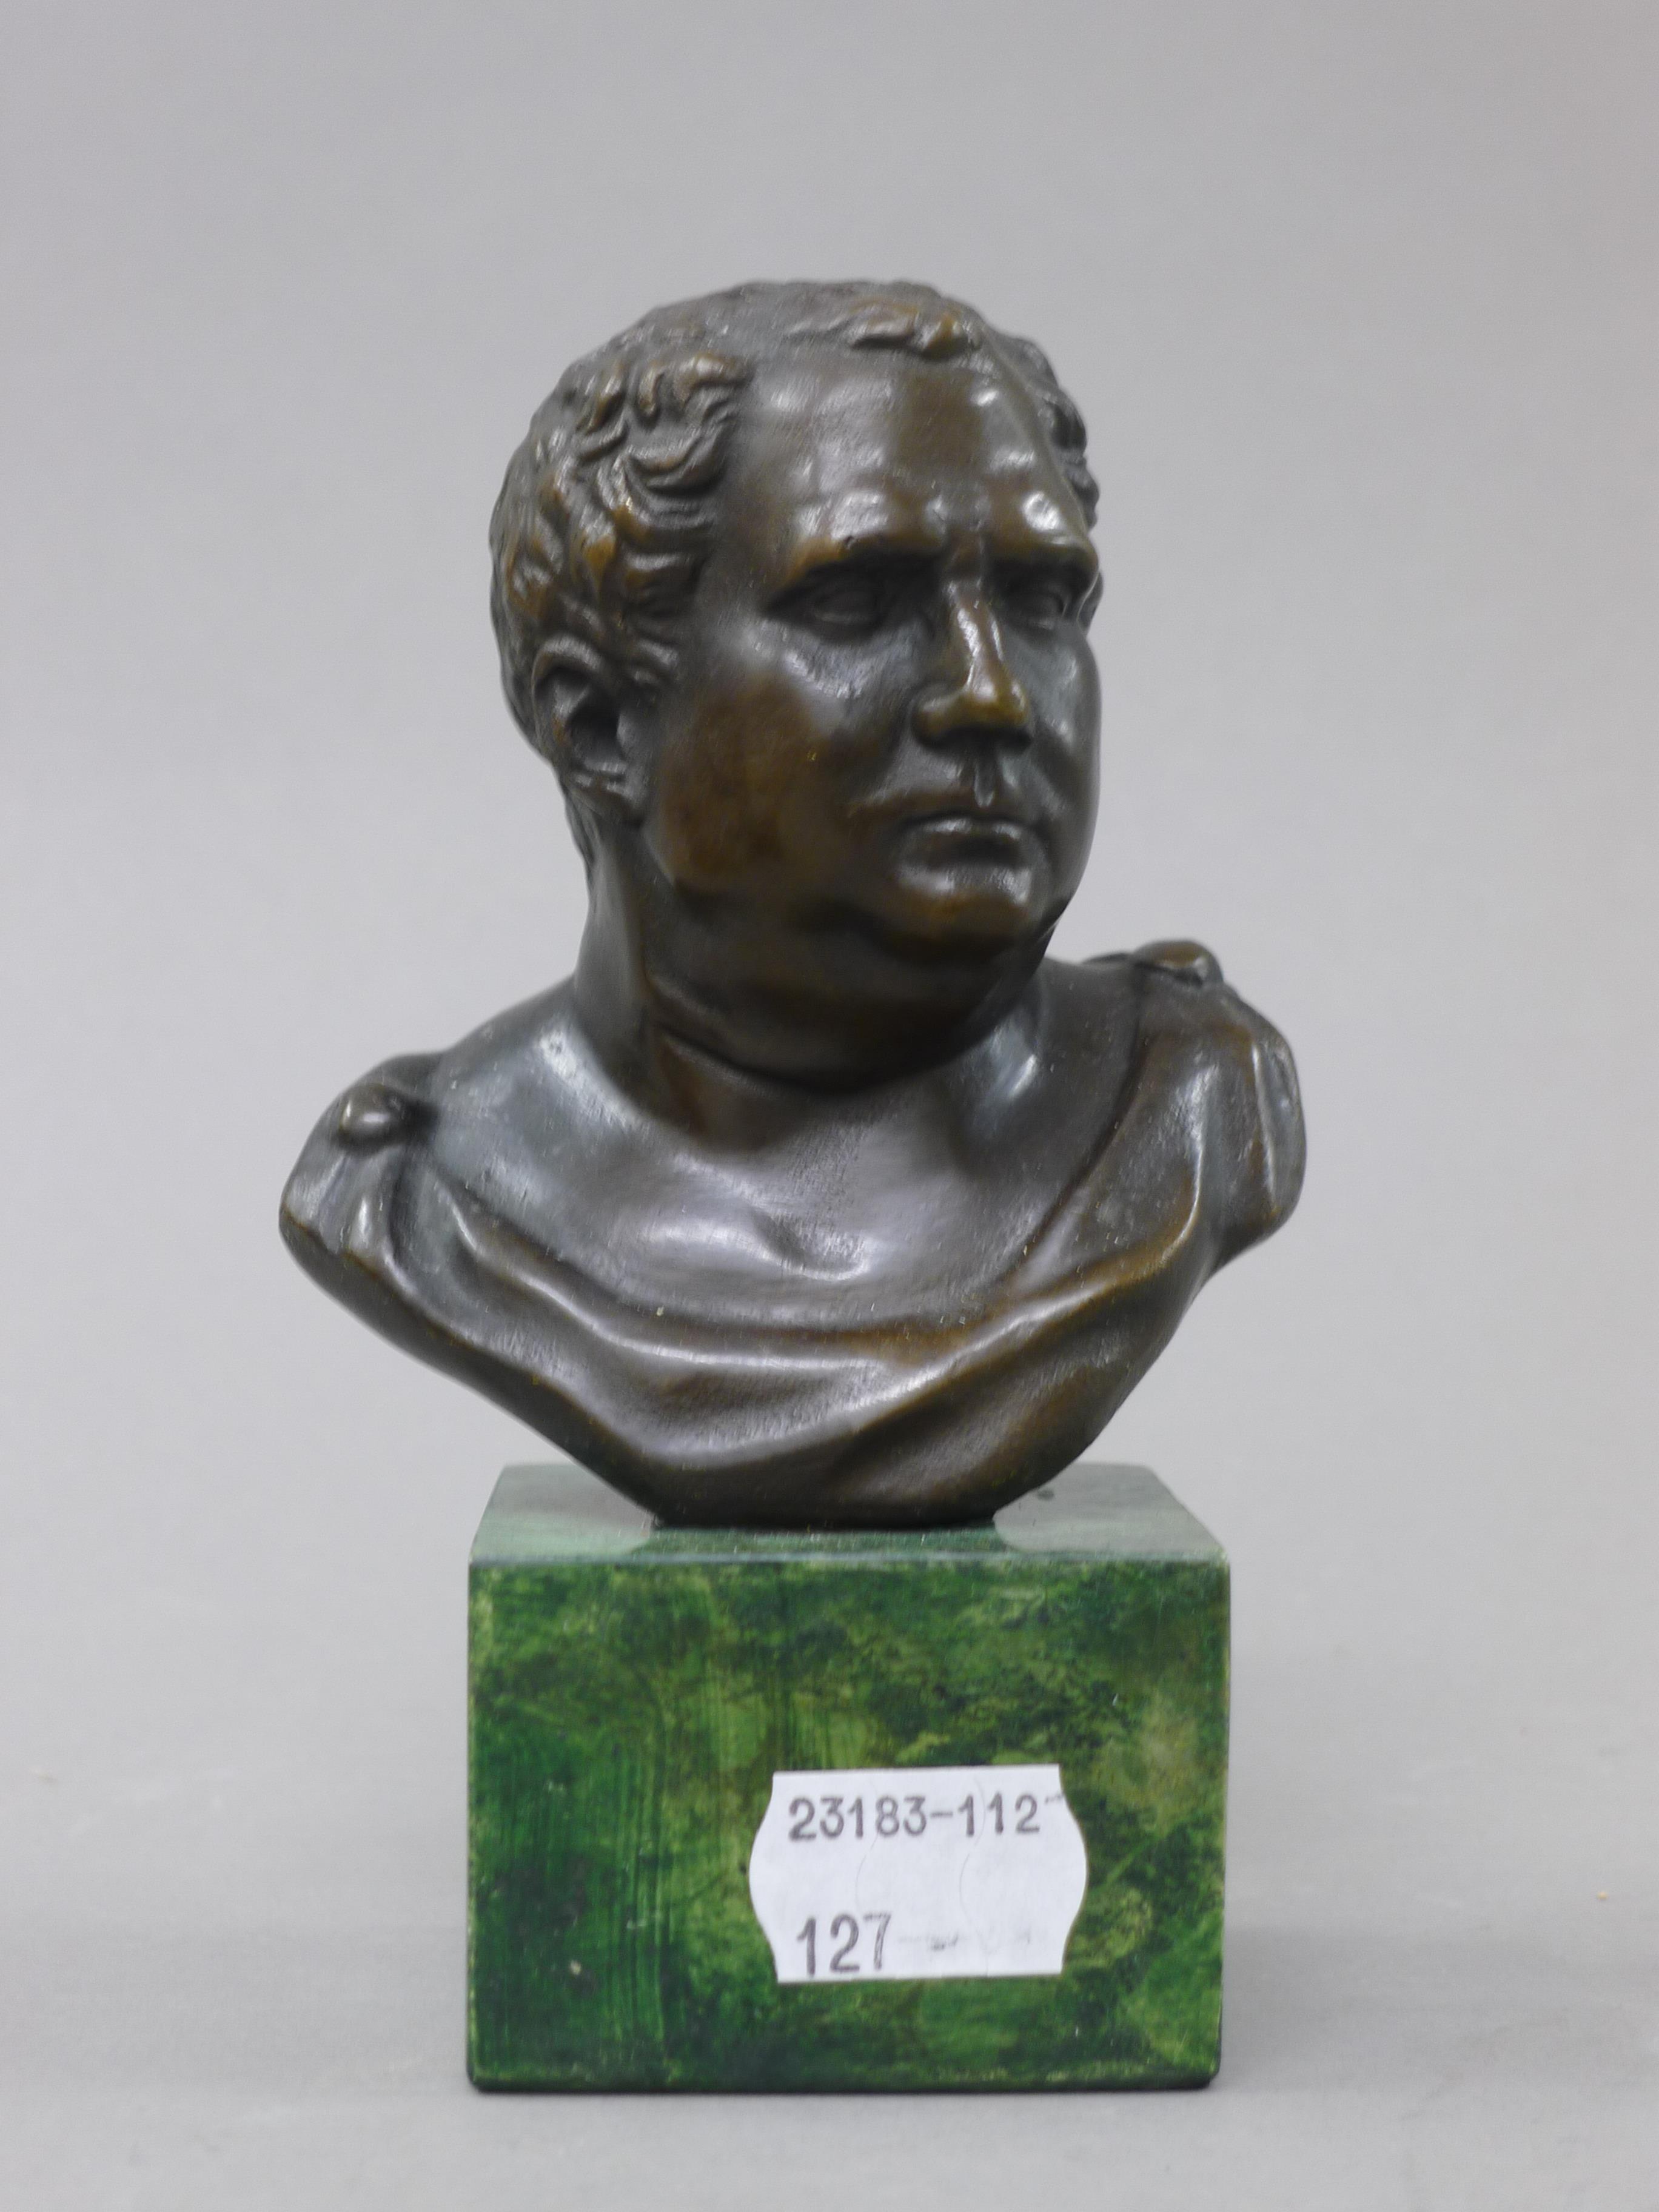 A small bronze bust on a marble plinth. 14 cm high.